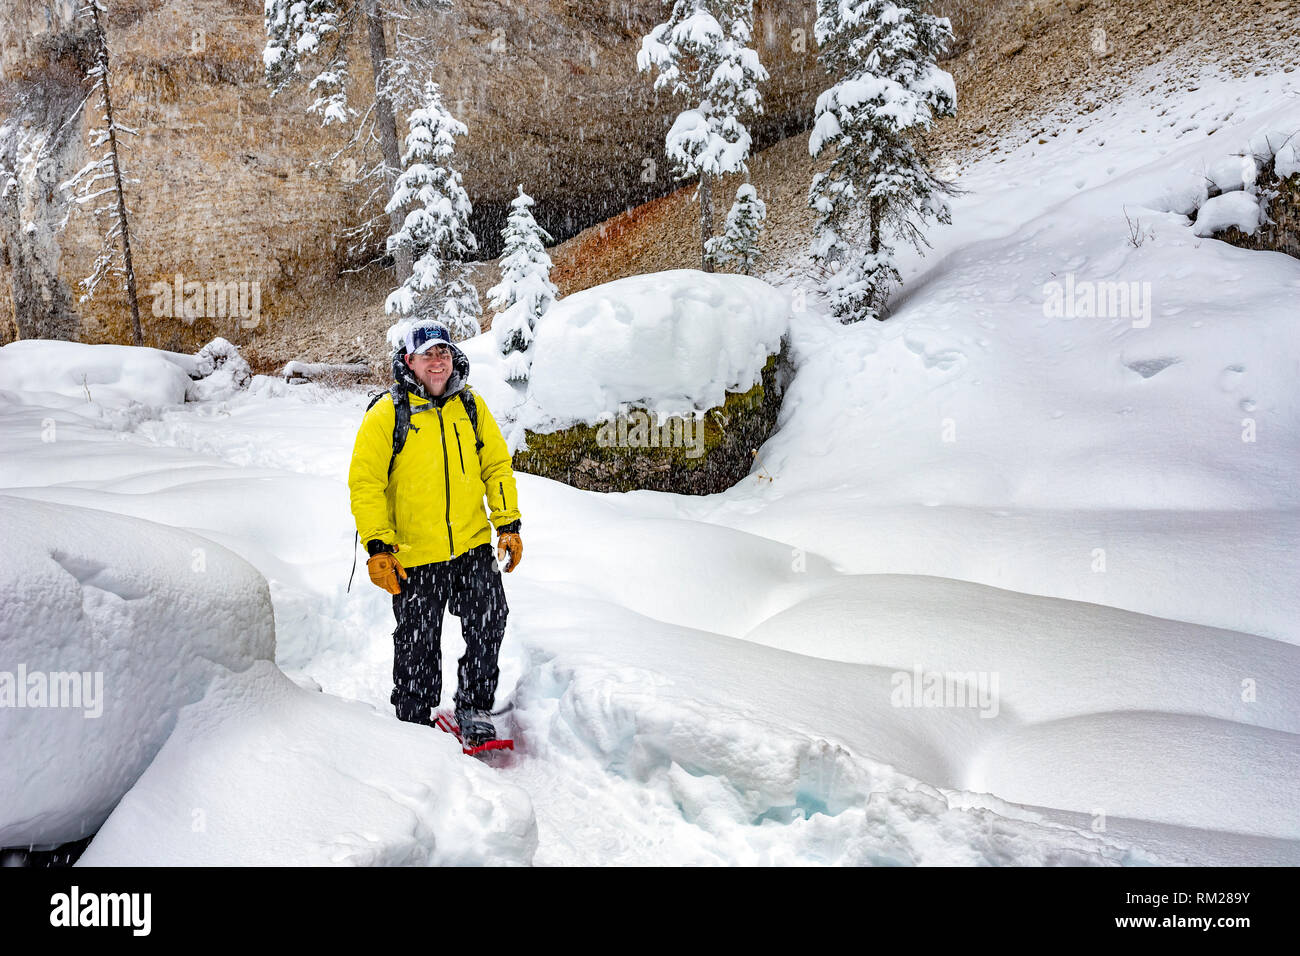 WY03631-00...WYOMING - Snowshoeing in Pebble Creek Canyon, Yellowstone National Park. Stock Photo